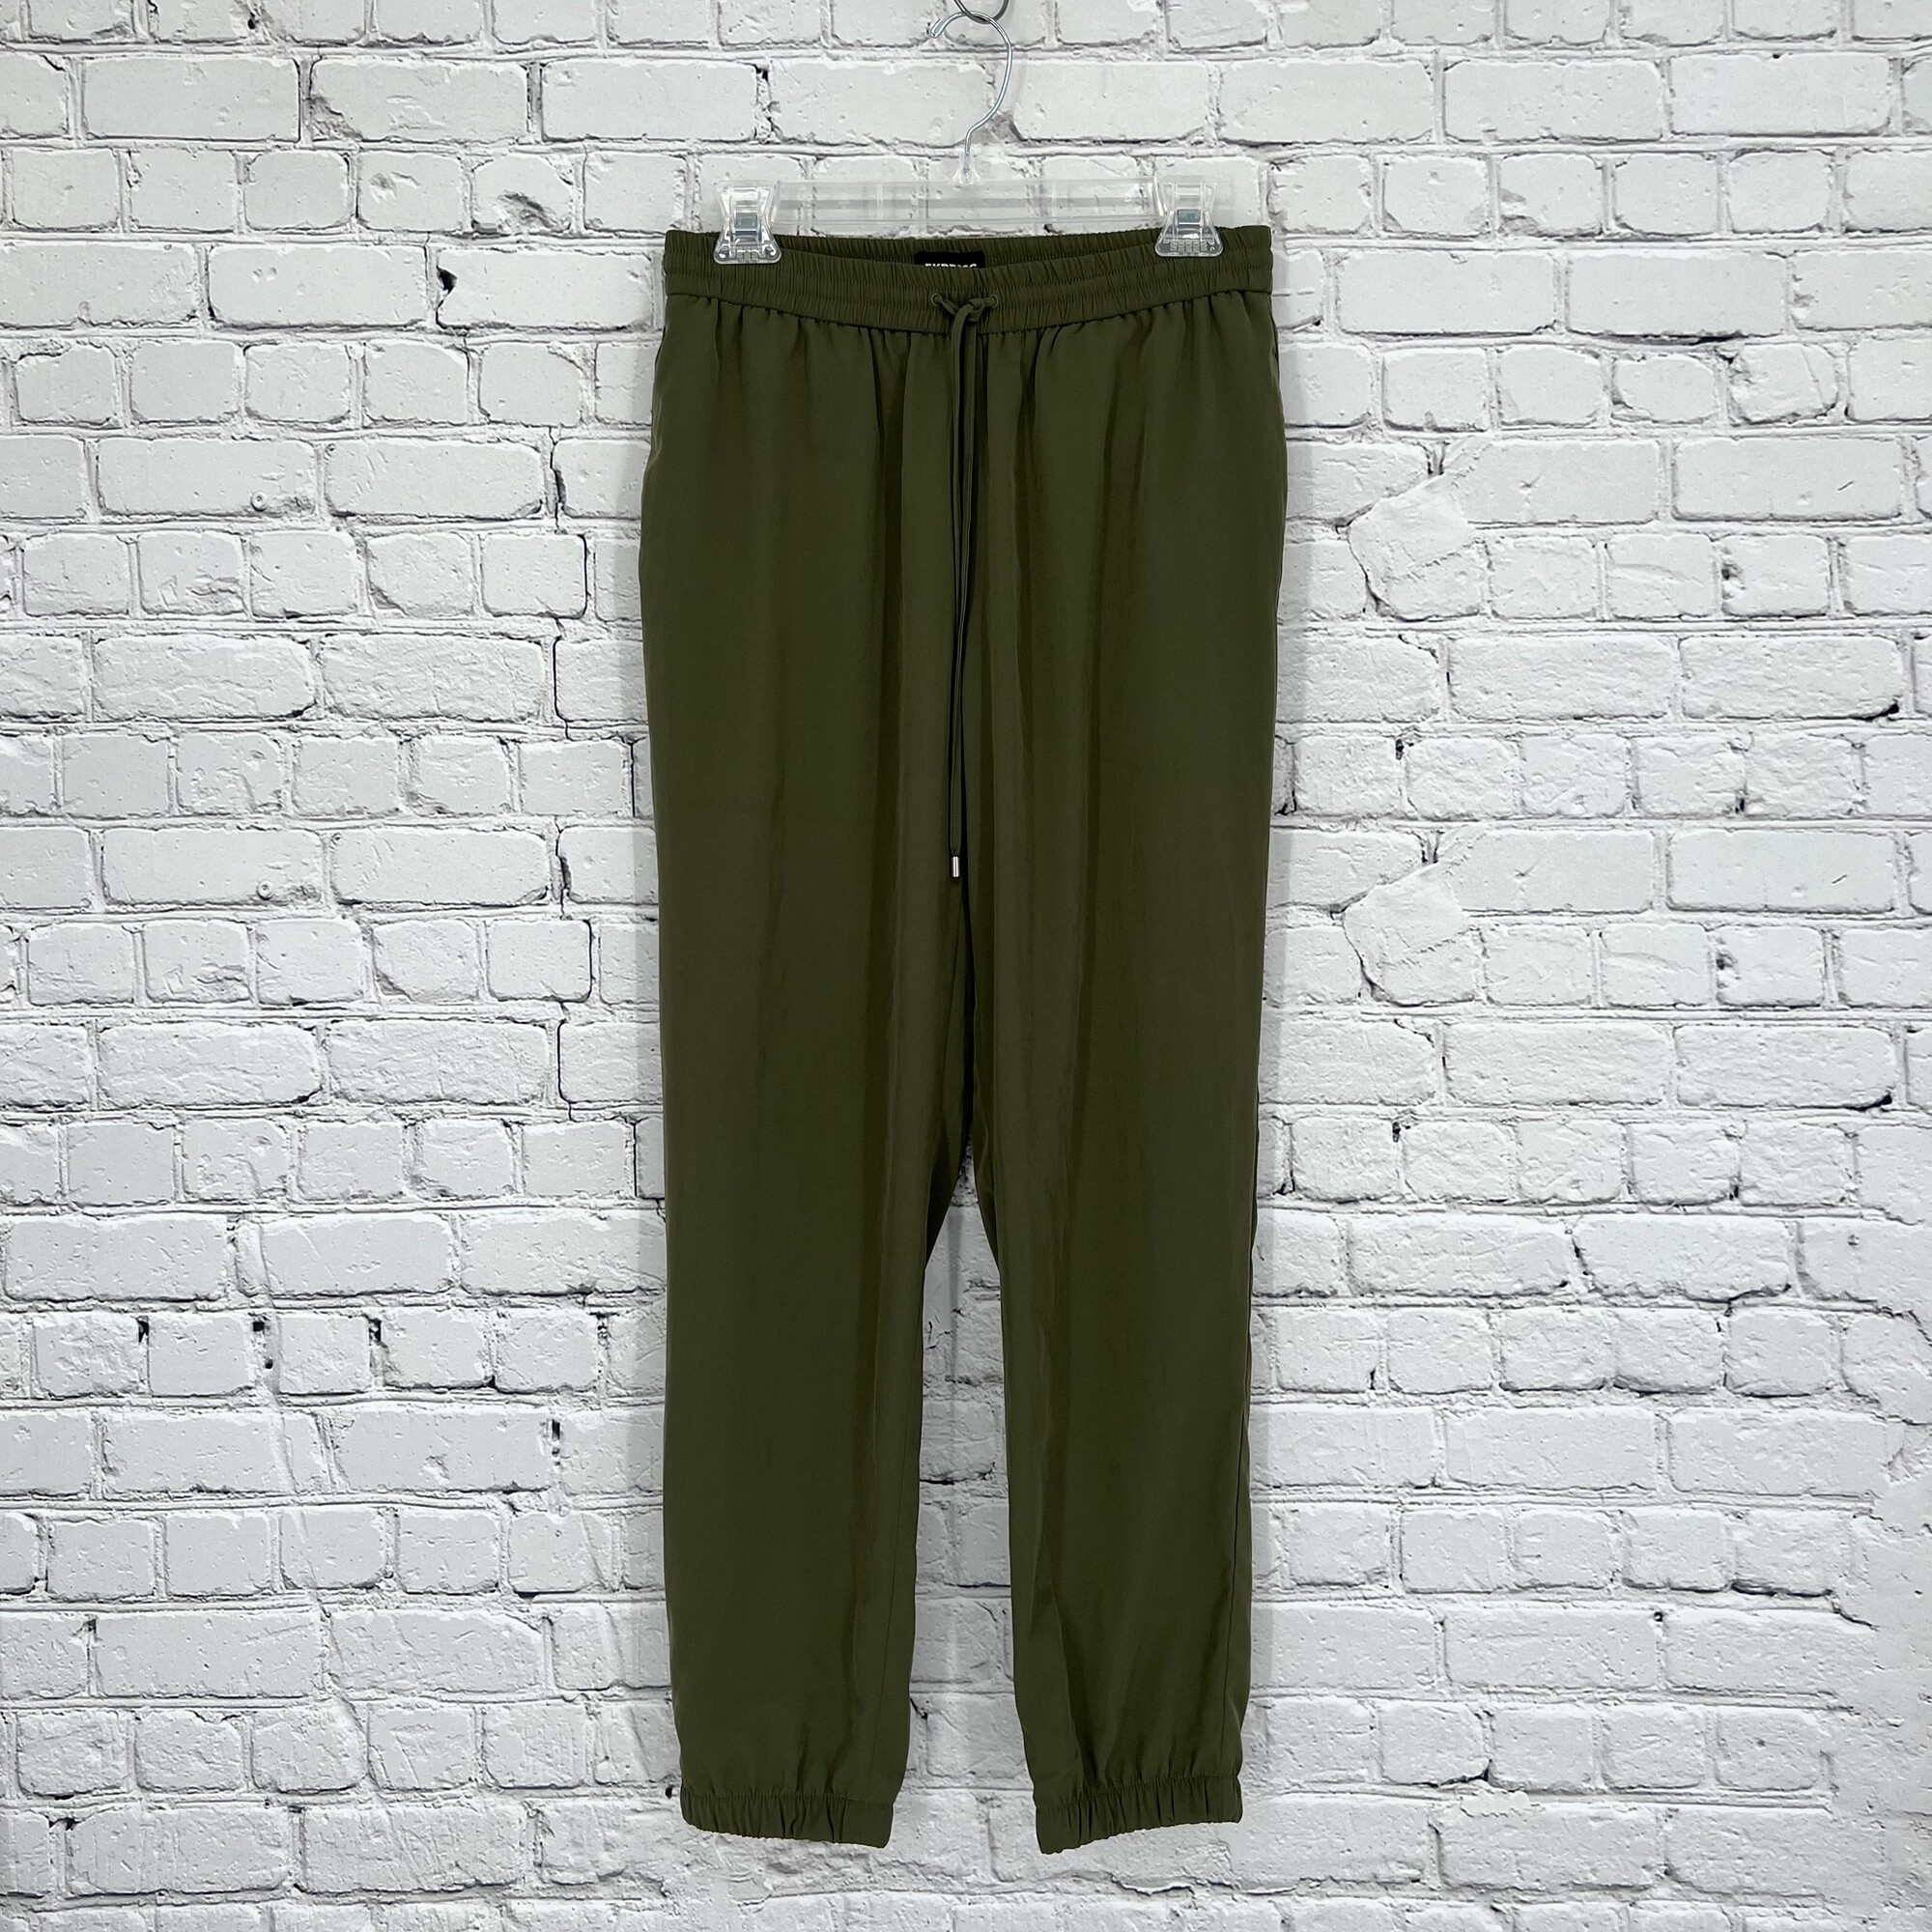 Express Pants NWT, Olive, Size: Small